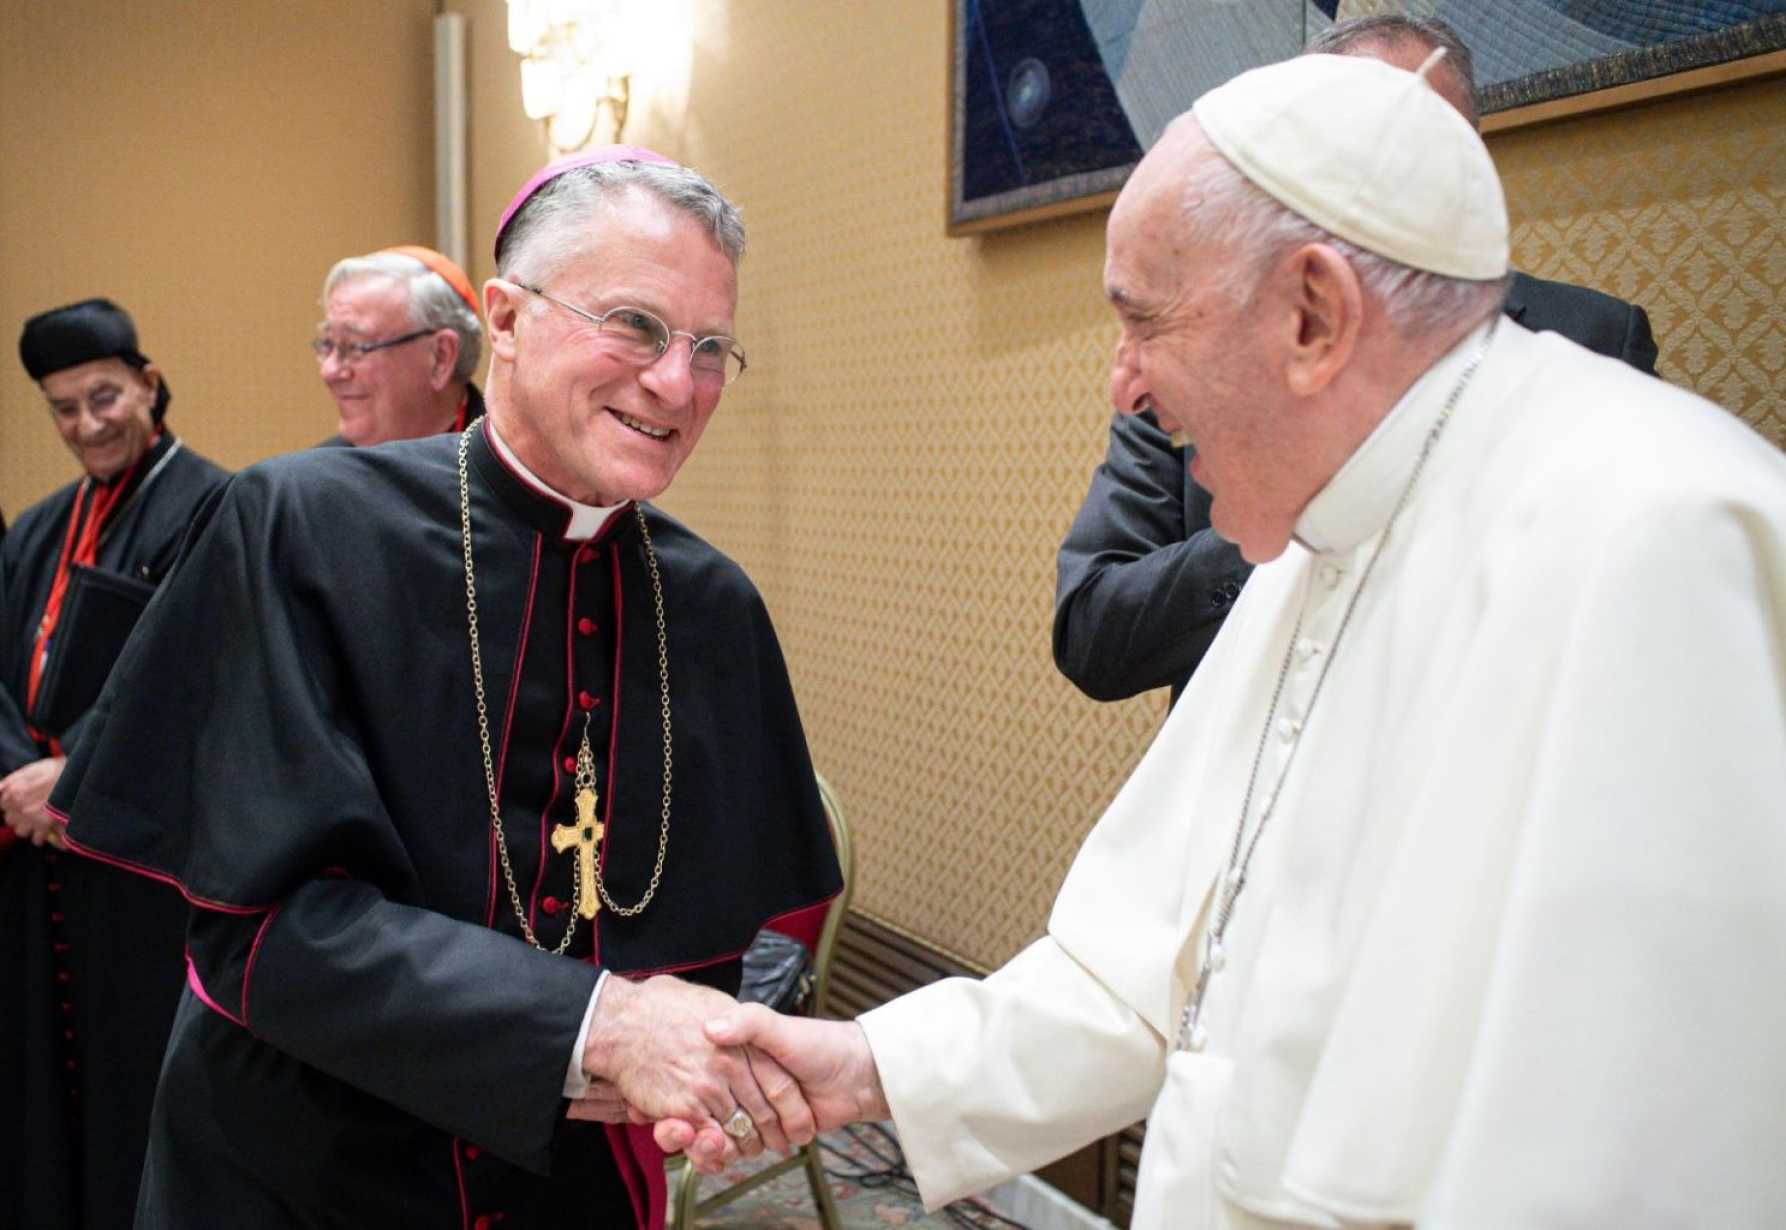 Regional representatives meet pope, discuss 'continental phase' of synod